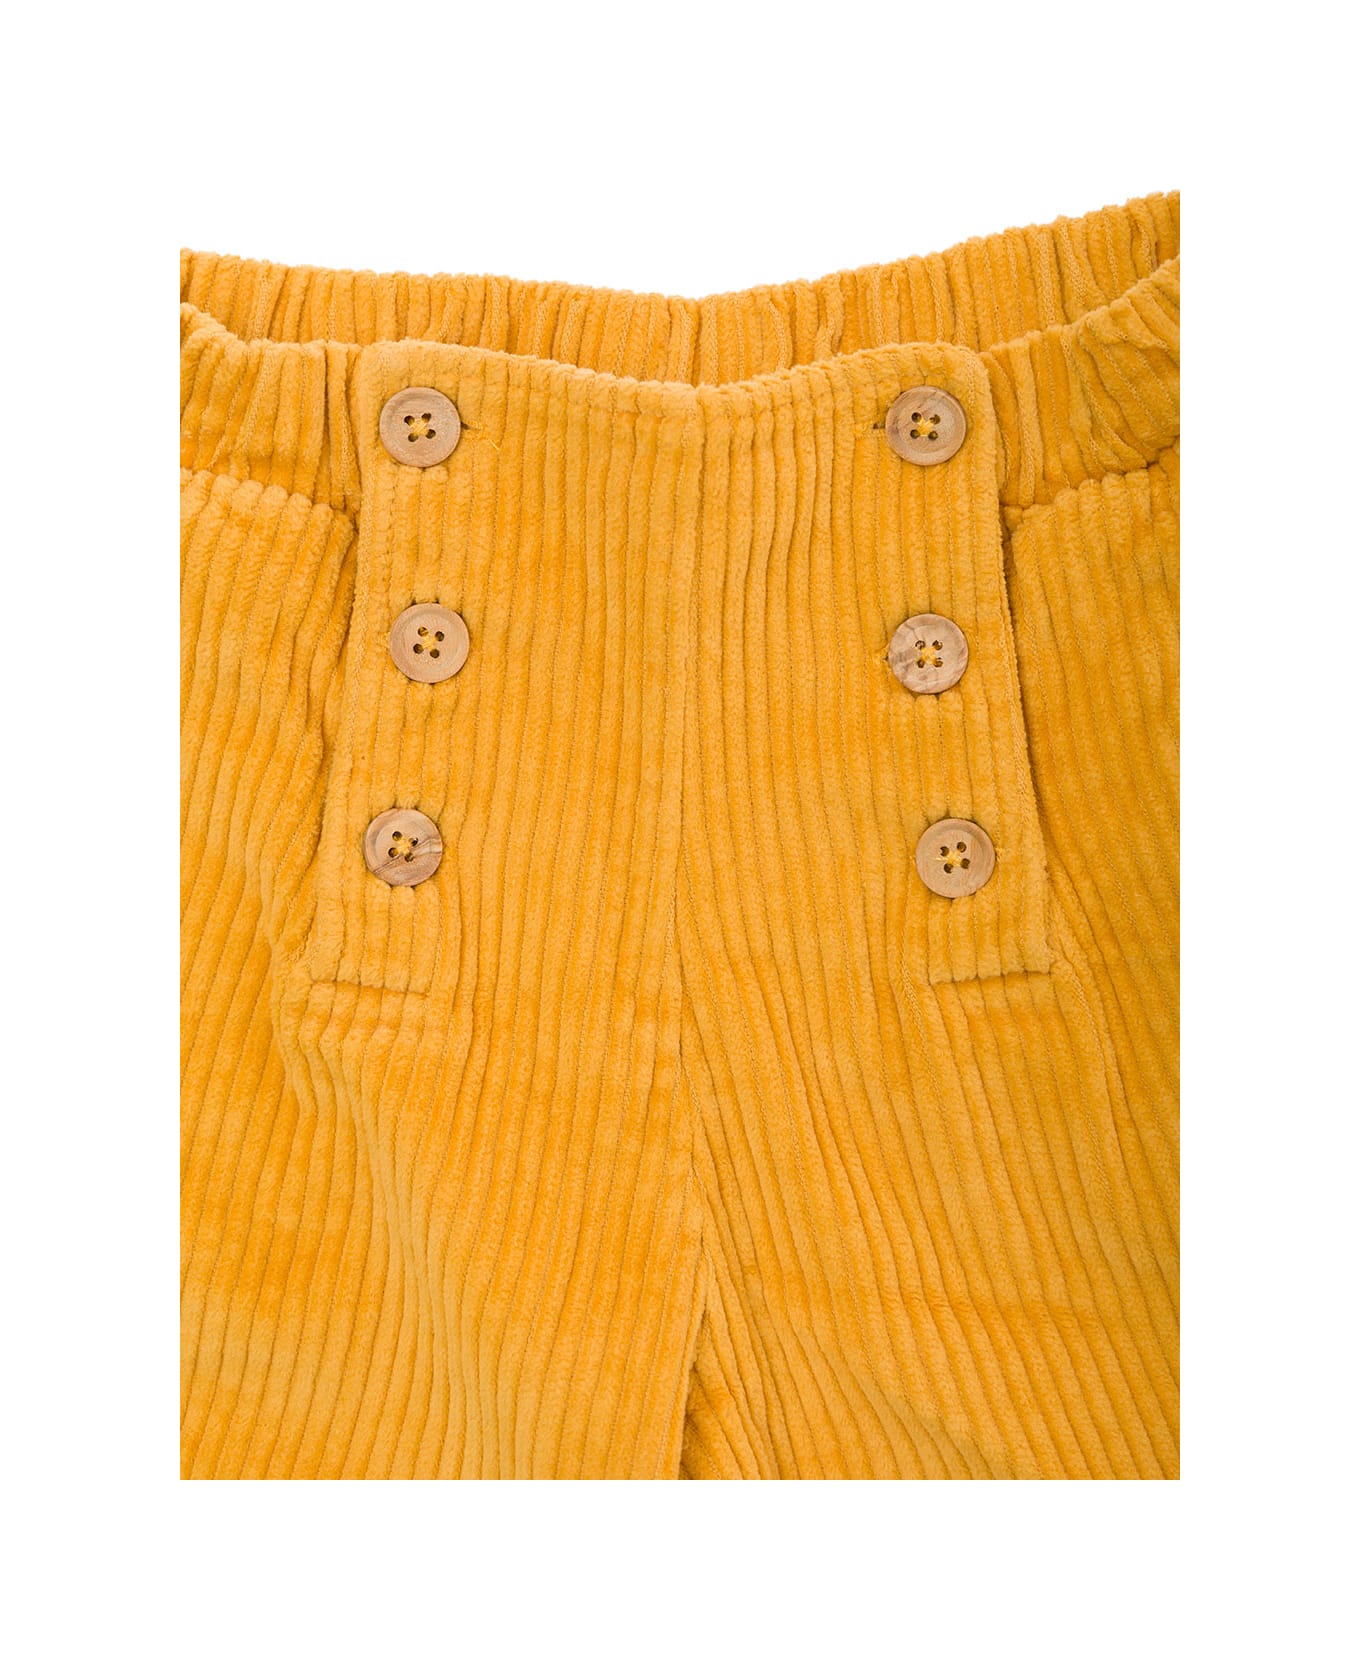 Emile Et Ida Yellow Pants With Front Buttons In Corduroy Girl - Orange ボトムス